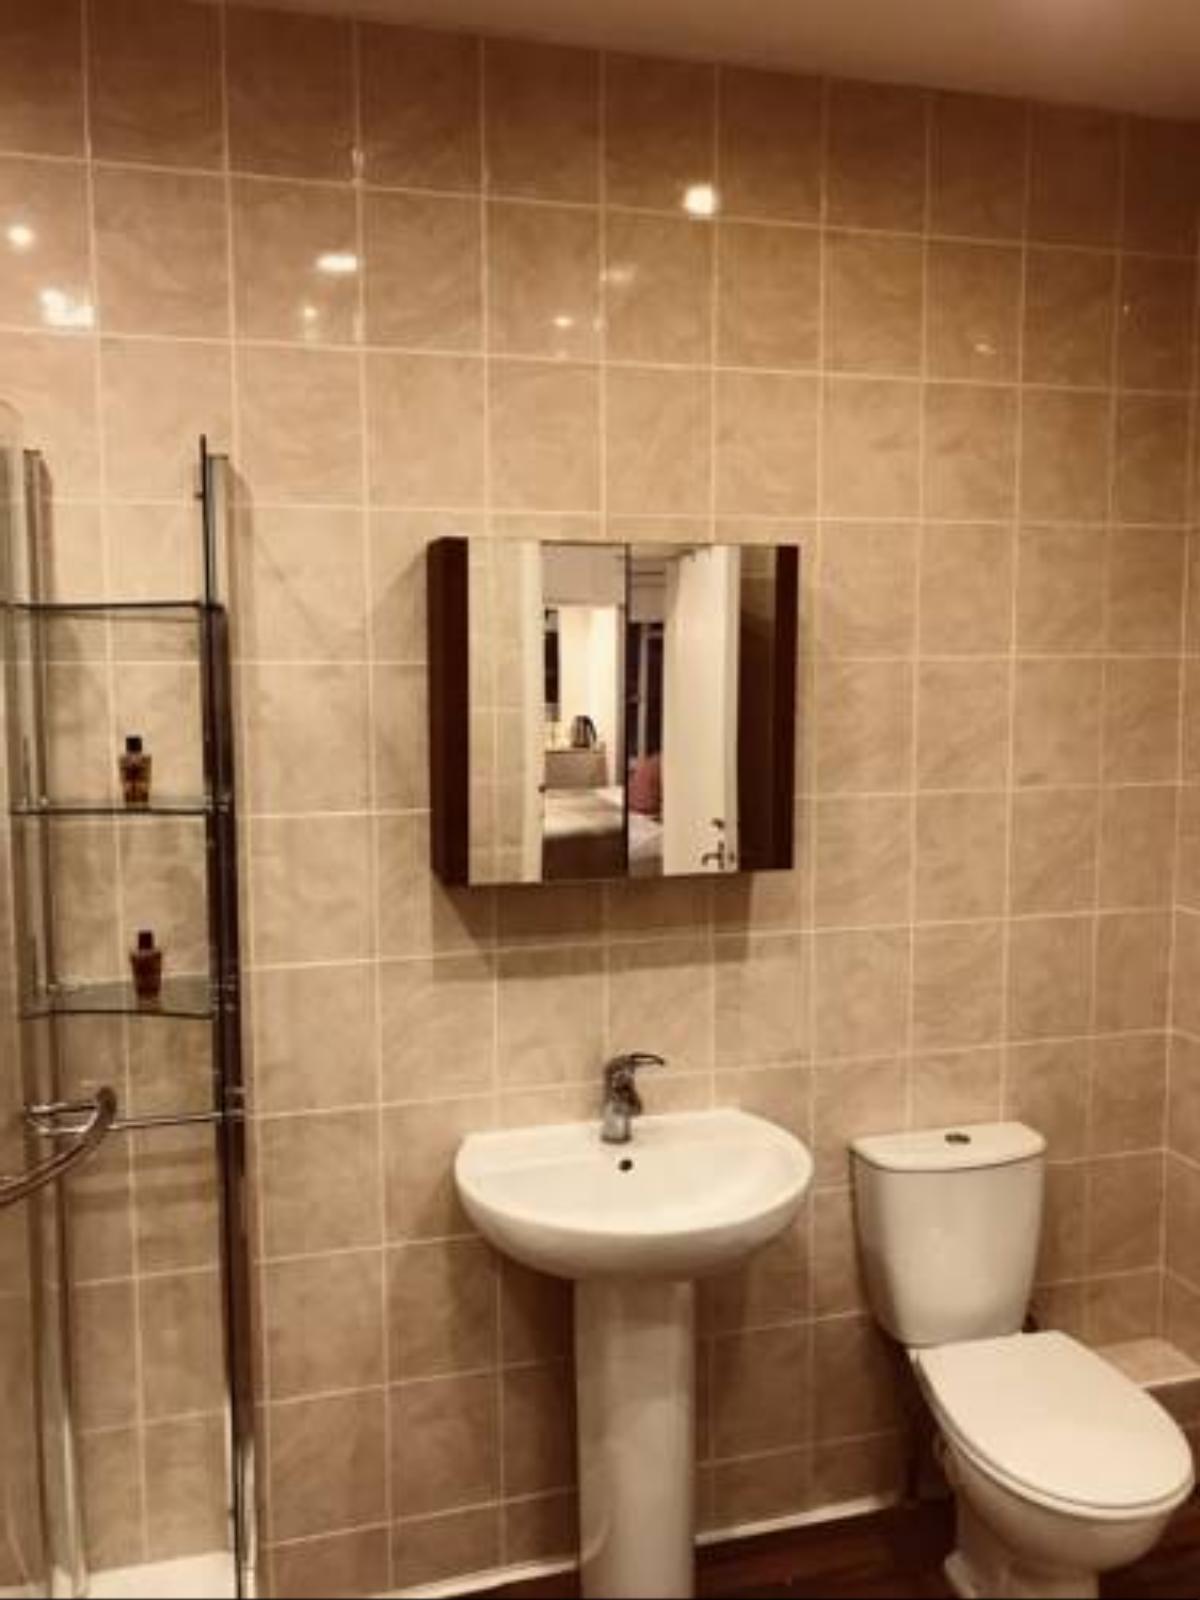 6 bedroom detached house Hotel Coventry United Kingdom